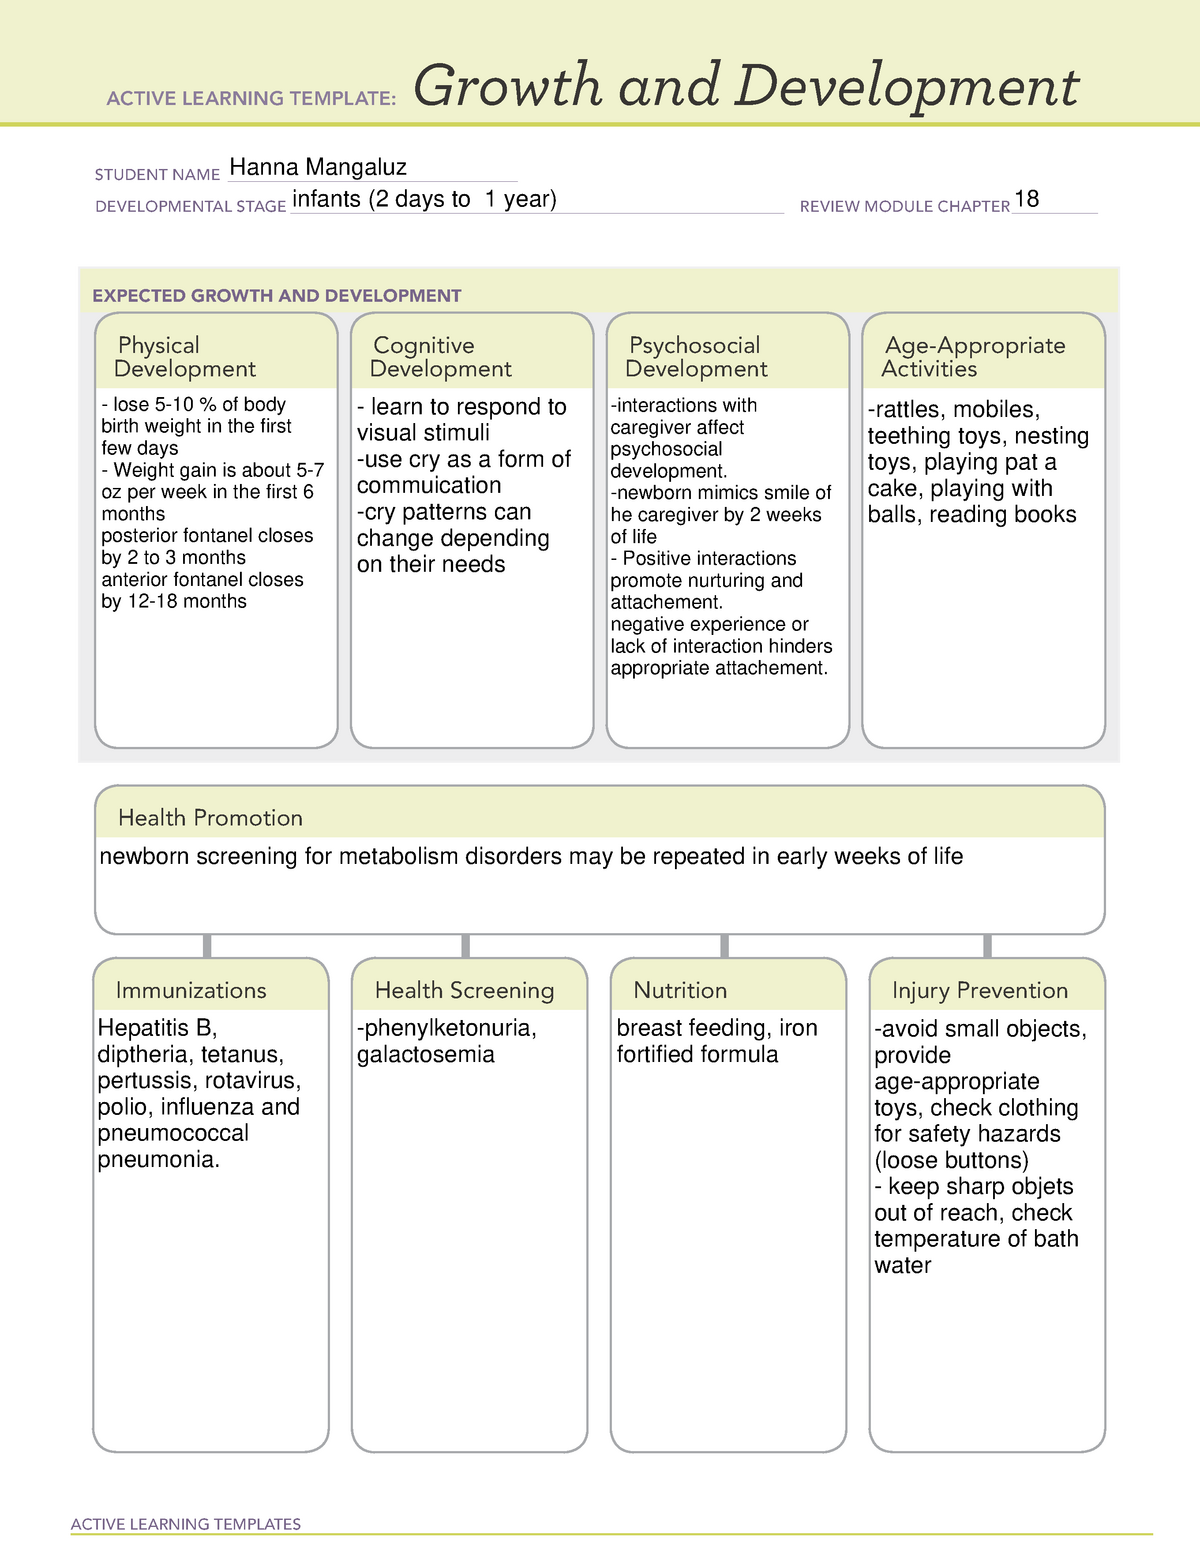 18-ati-active-learning-templates-expected-growth-and-development-growth-and-development